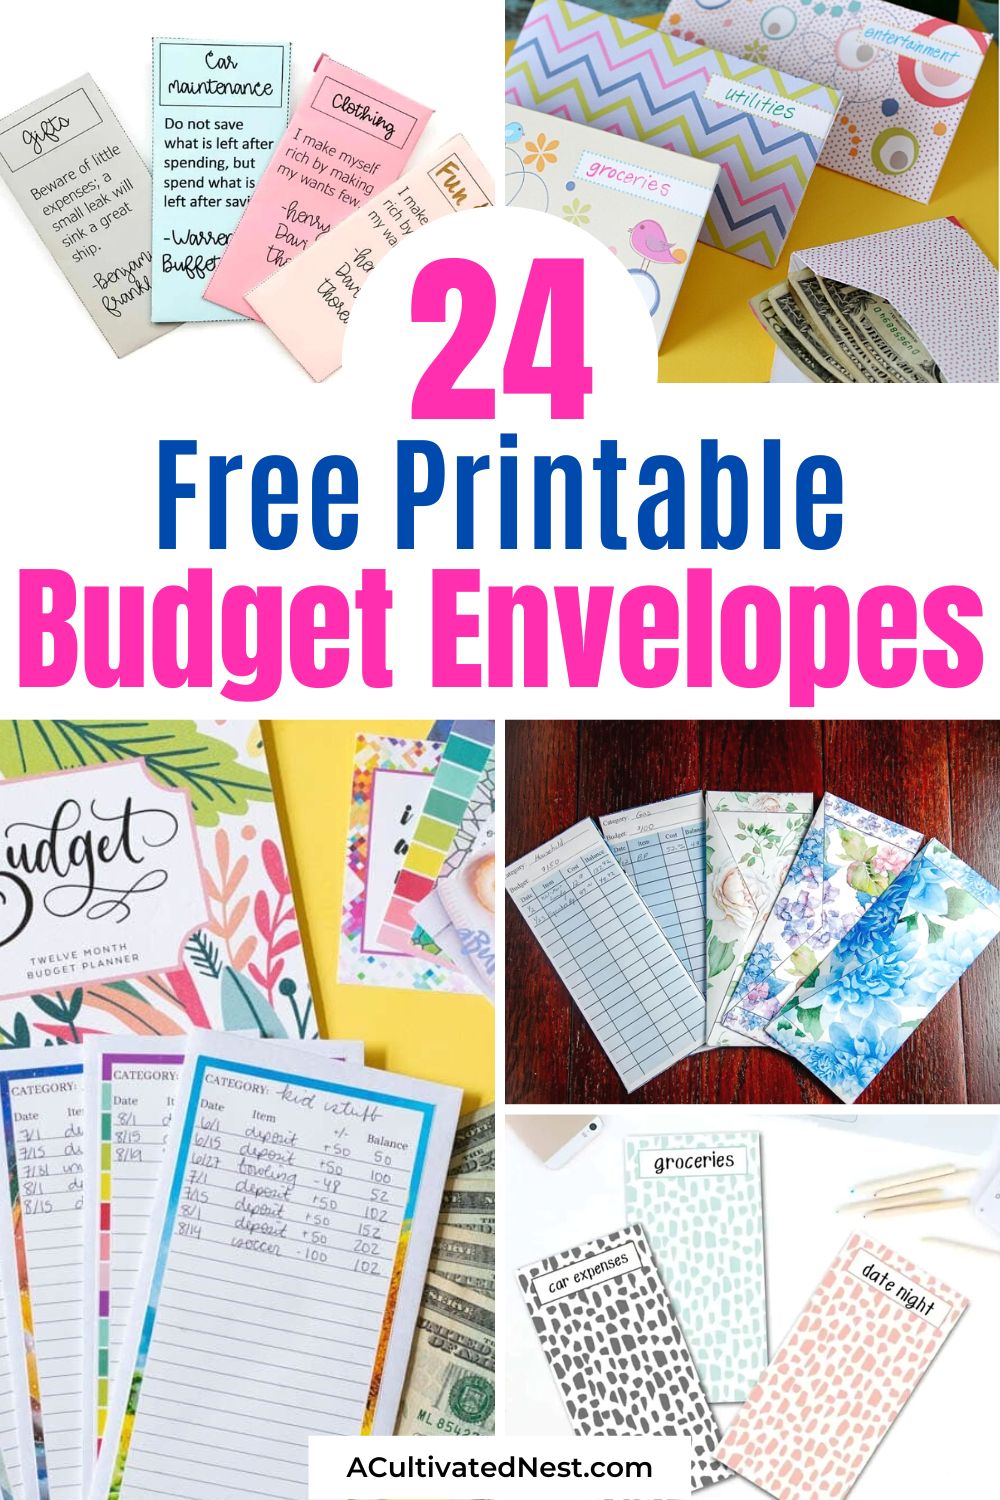 24 Free Printable Cash Envelope Templates- If you want an easy way to keep your spending under control, then you'll love these free printable cash envelope templates! The cash envelope budgeting system is so easy to set up and use! | #budget #cashEnvelopeSystem #saveMoney #freePrintables #ACultivatedNest